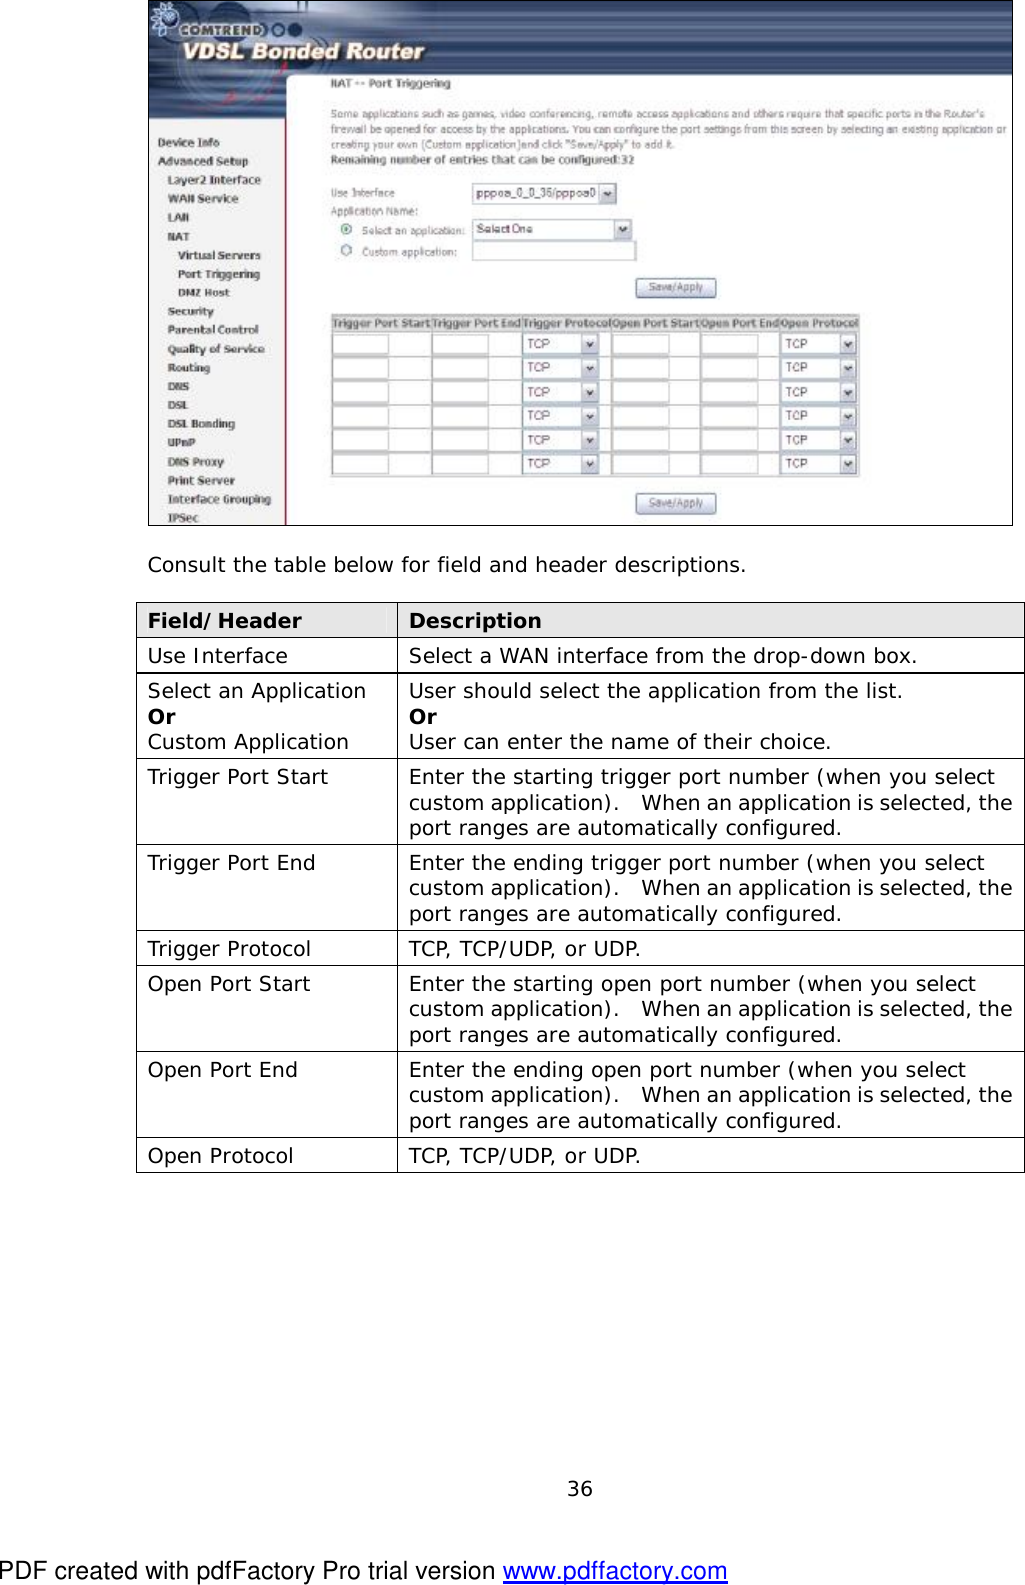  36   Consult the table below for field and header descriptions.  Field/Header  Description Use Interface  Select a WAN interface from the drop-down box. Select an Application Or  Custom Application User should select the application from the list. Or  User can enter the name of their choice. Trigger Port Start  Enter the starting trigger port number (when you select custom application).  When an application is selected, the port ranges are automatically configured. Trigger Port End  Enter the ending trigger port number (when you select custom application).  When an application is selected, the port ranges are automatically configured. Trigger Protocol  TCP, TCP/UDP, or UDP. Open Port Start  Enter the starting open port number (when you select custom application).  When an application is selected, the port ranges are automatically configured. Open Port End  Enter the ending open port number (when you select custom application).  When an application is selected, the port ranges are automatically configured. Open Protocol  TCP, TCP/UDP, or UDP.  PDF created with pdfFactory Pro trial version www.pdffactory.com